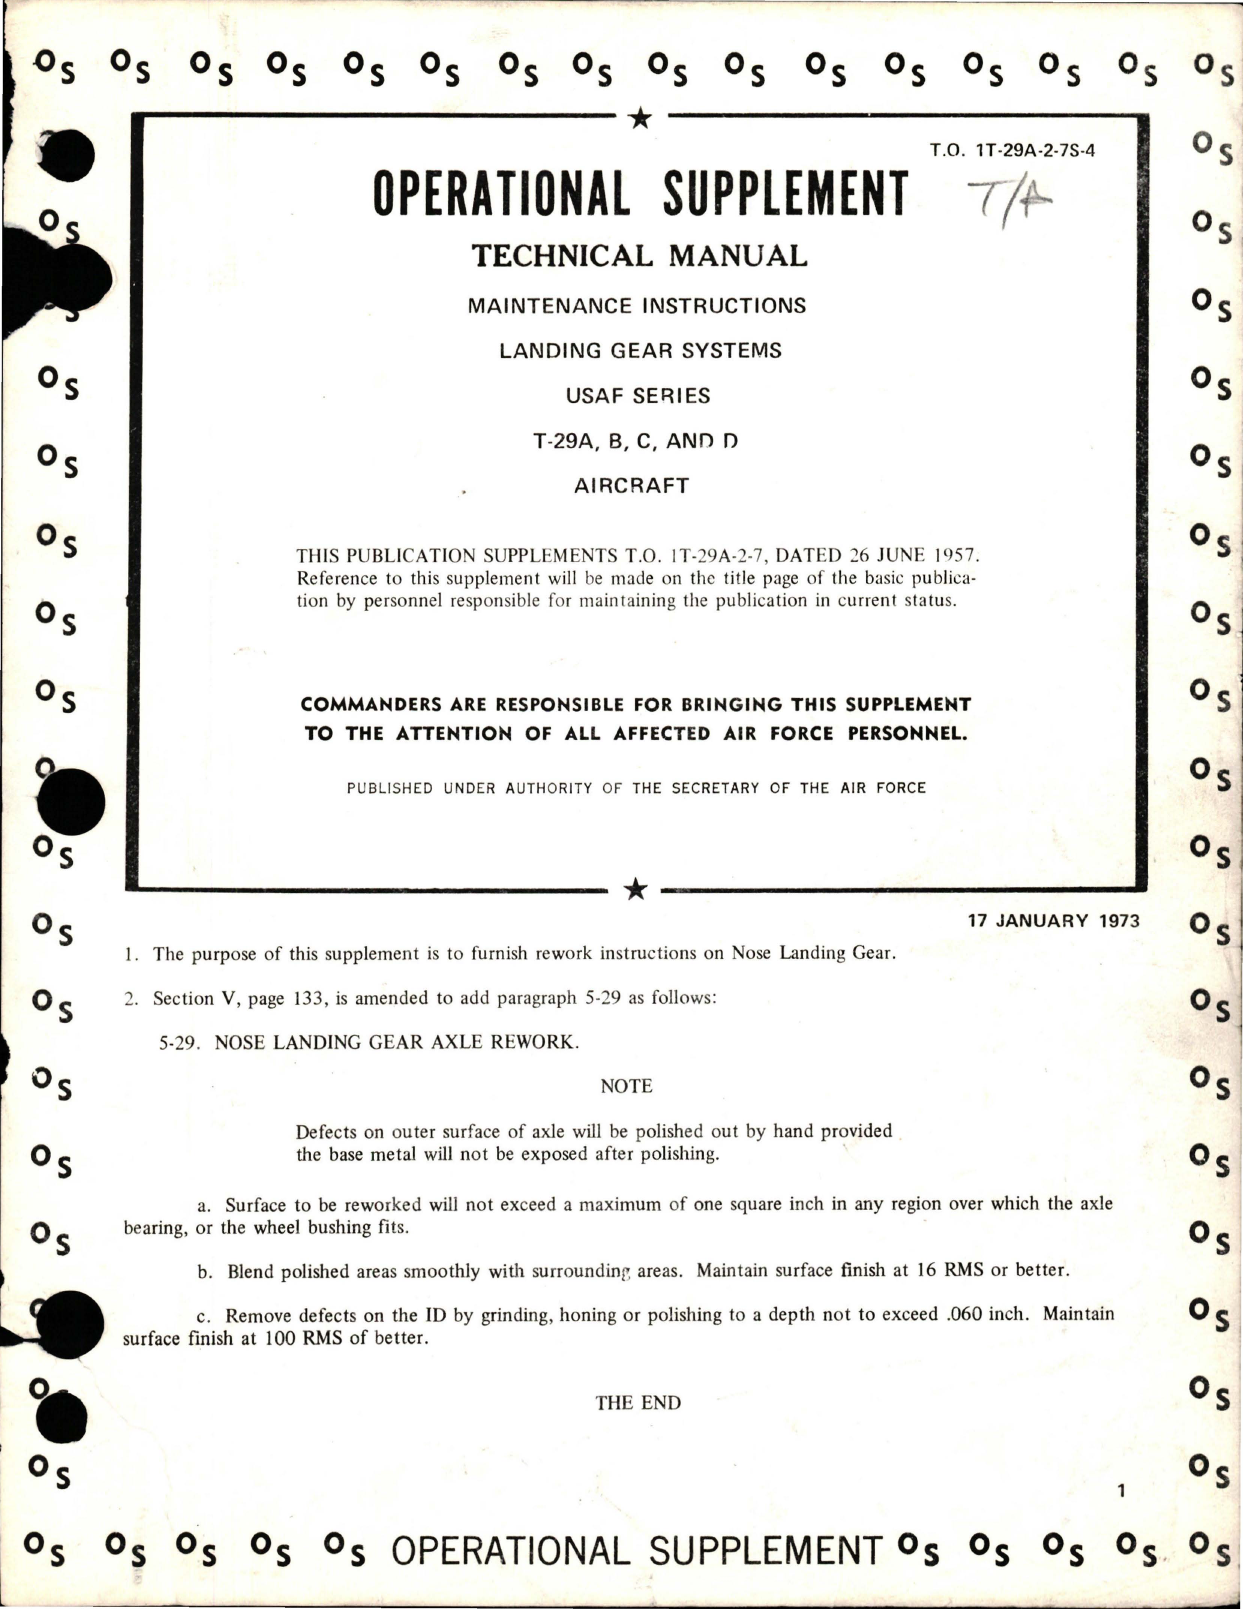 Sample page 1 from AirCorps Library document: Operational Supplement for Maintenance Instructions for Landing Gear Systems - T-29A, T-29B, T-29C and T-29D